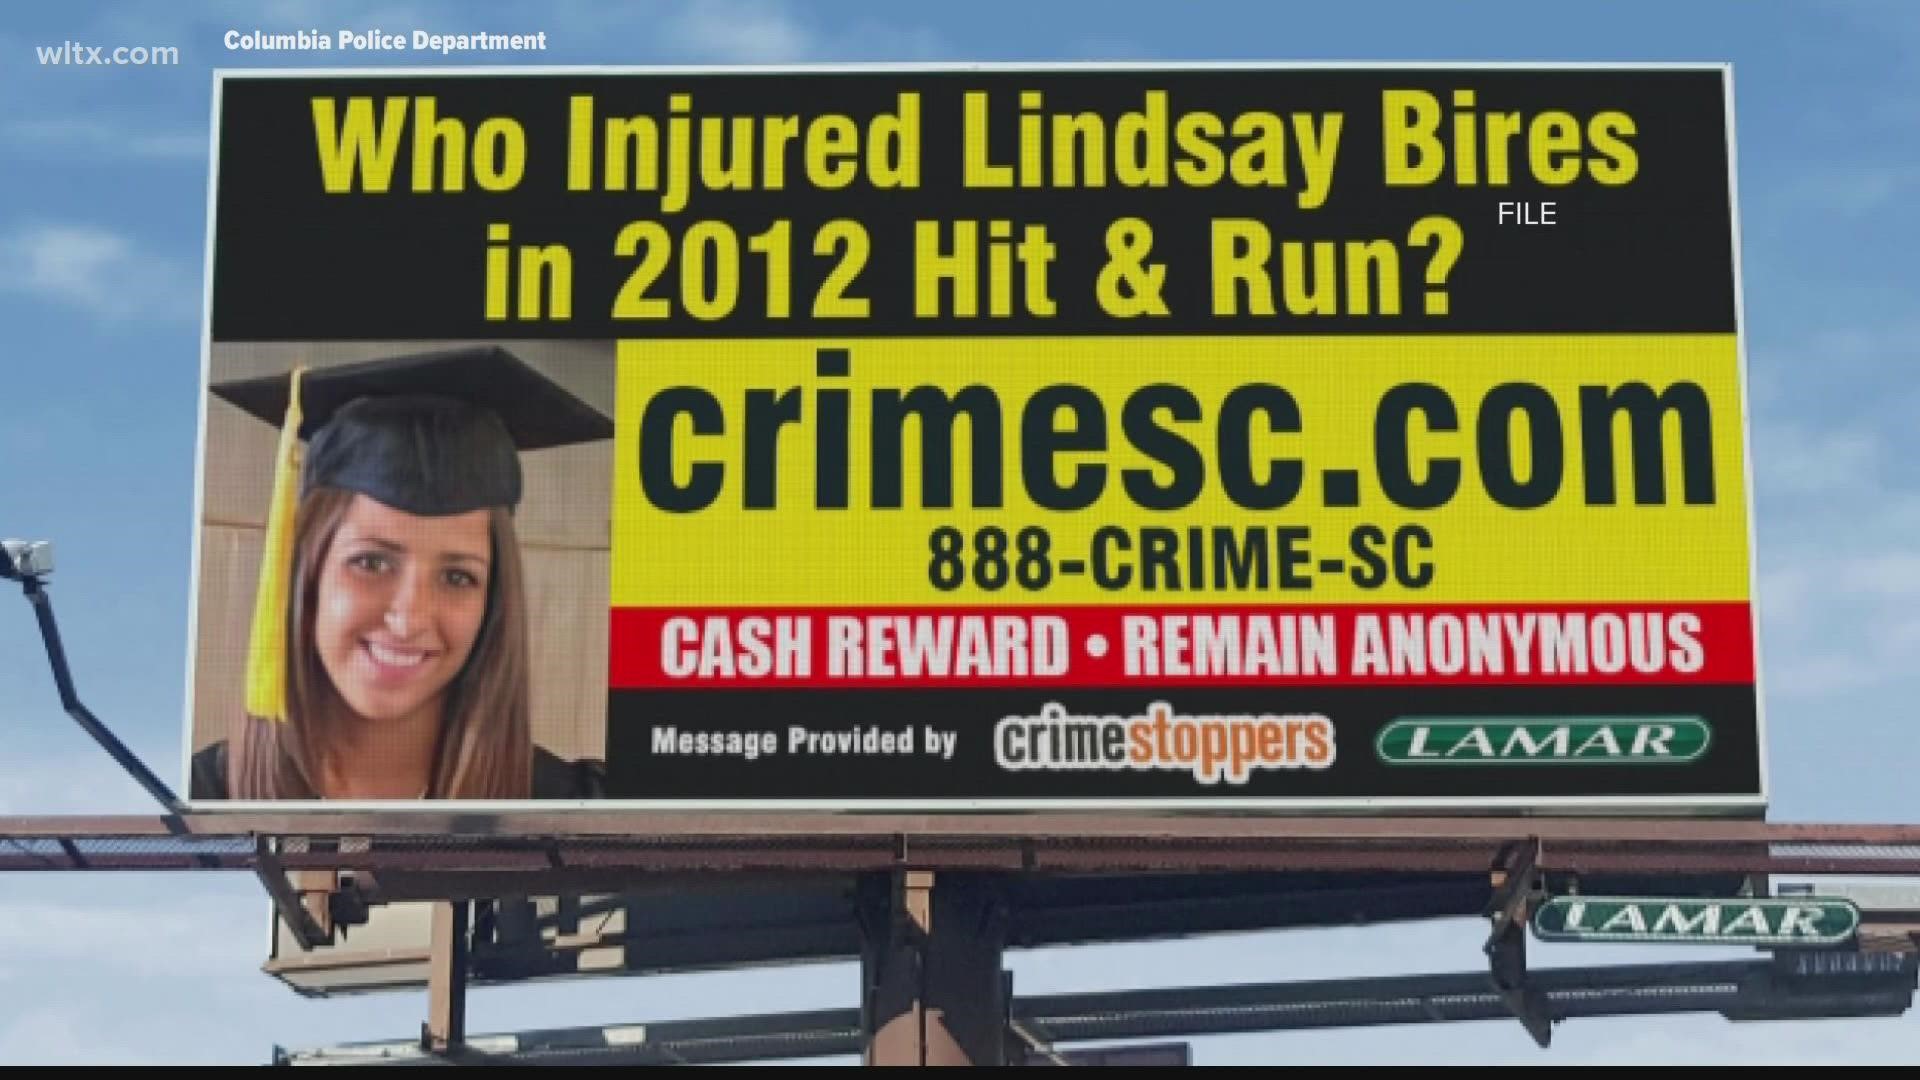 24-year-old Lindsay Bires was hit by a car while standing on the sidewalk outside of the Palmetto Health Hospital, where she worked as a nurse.